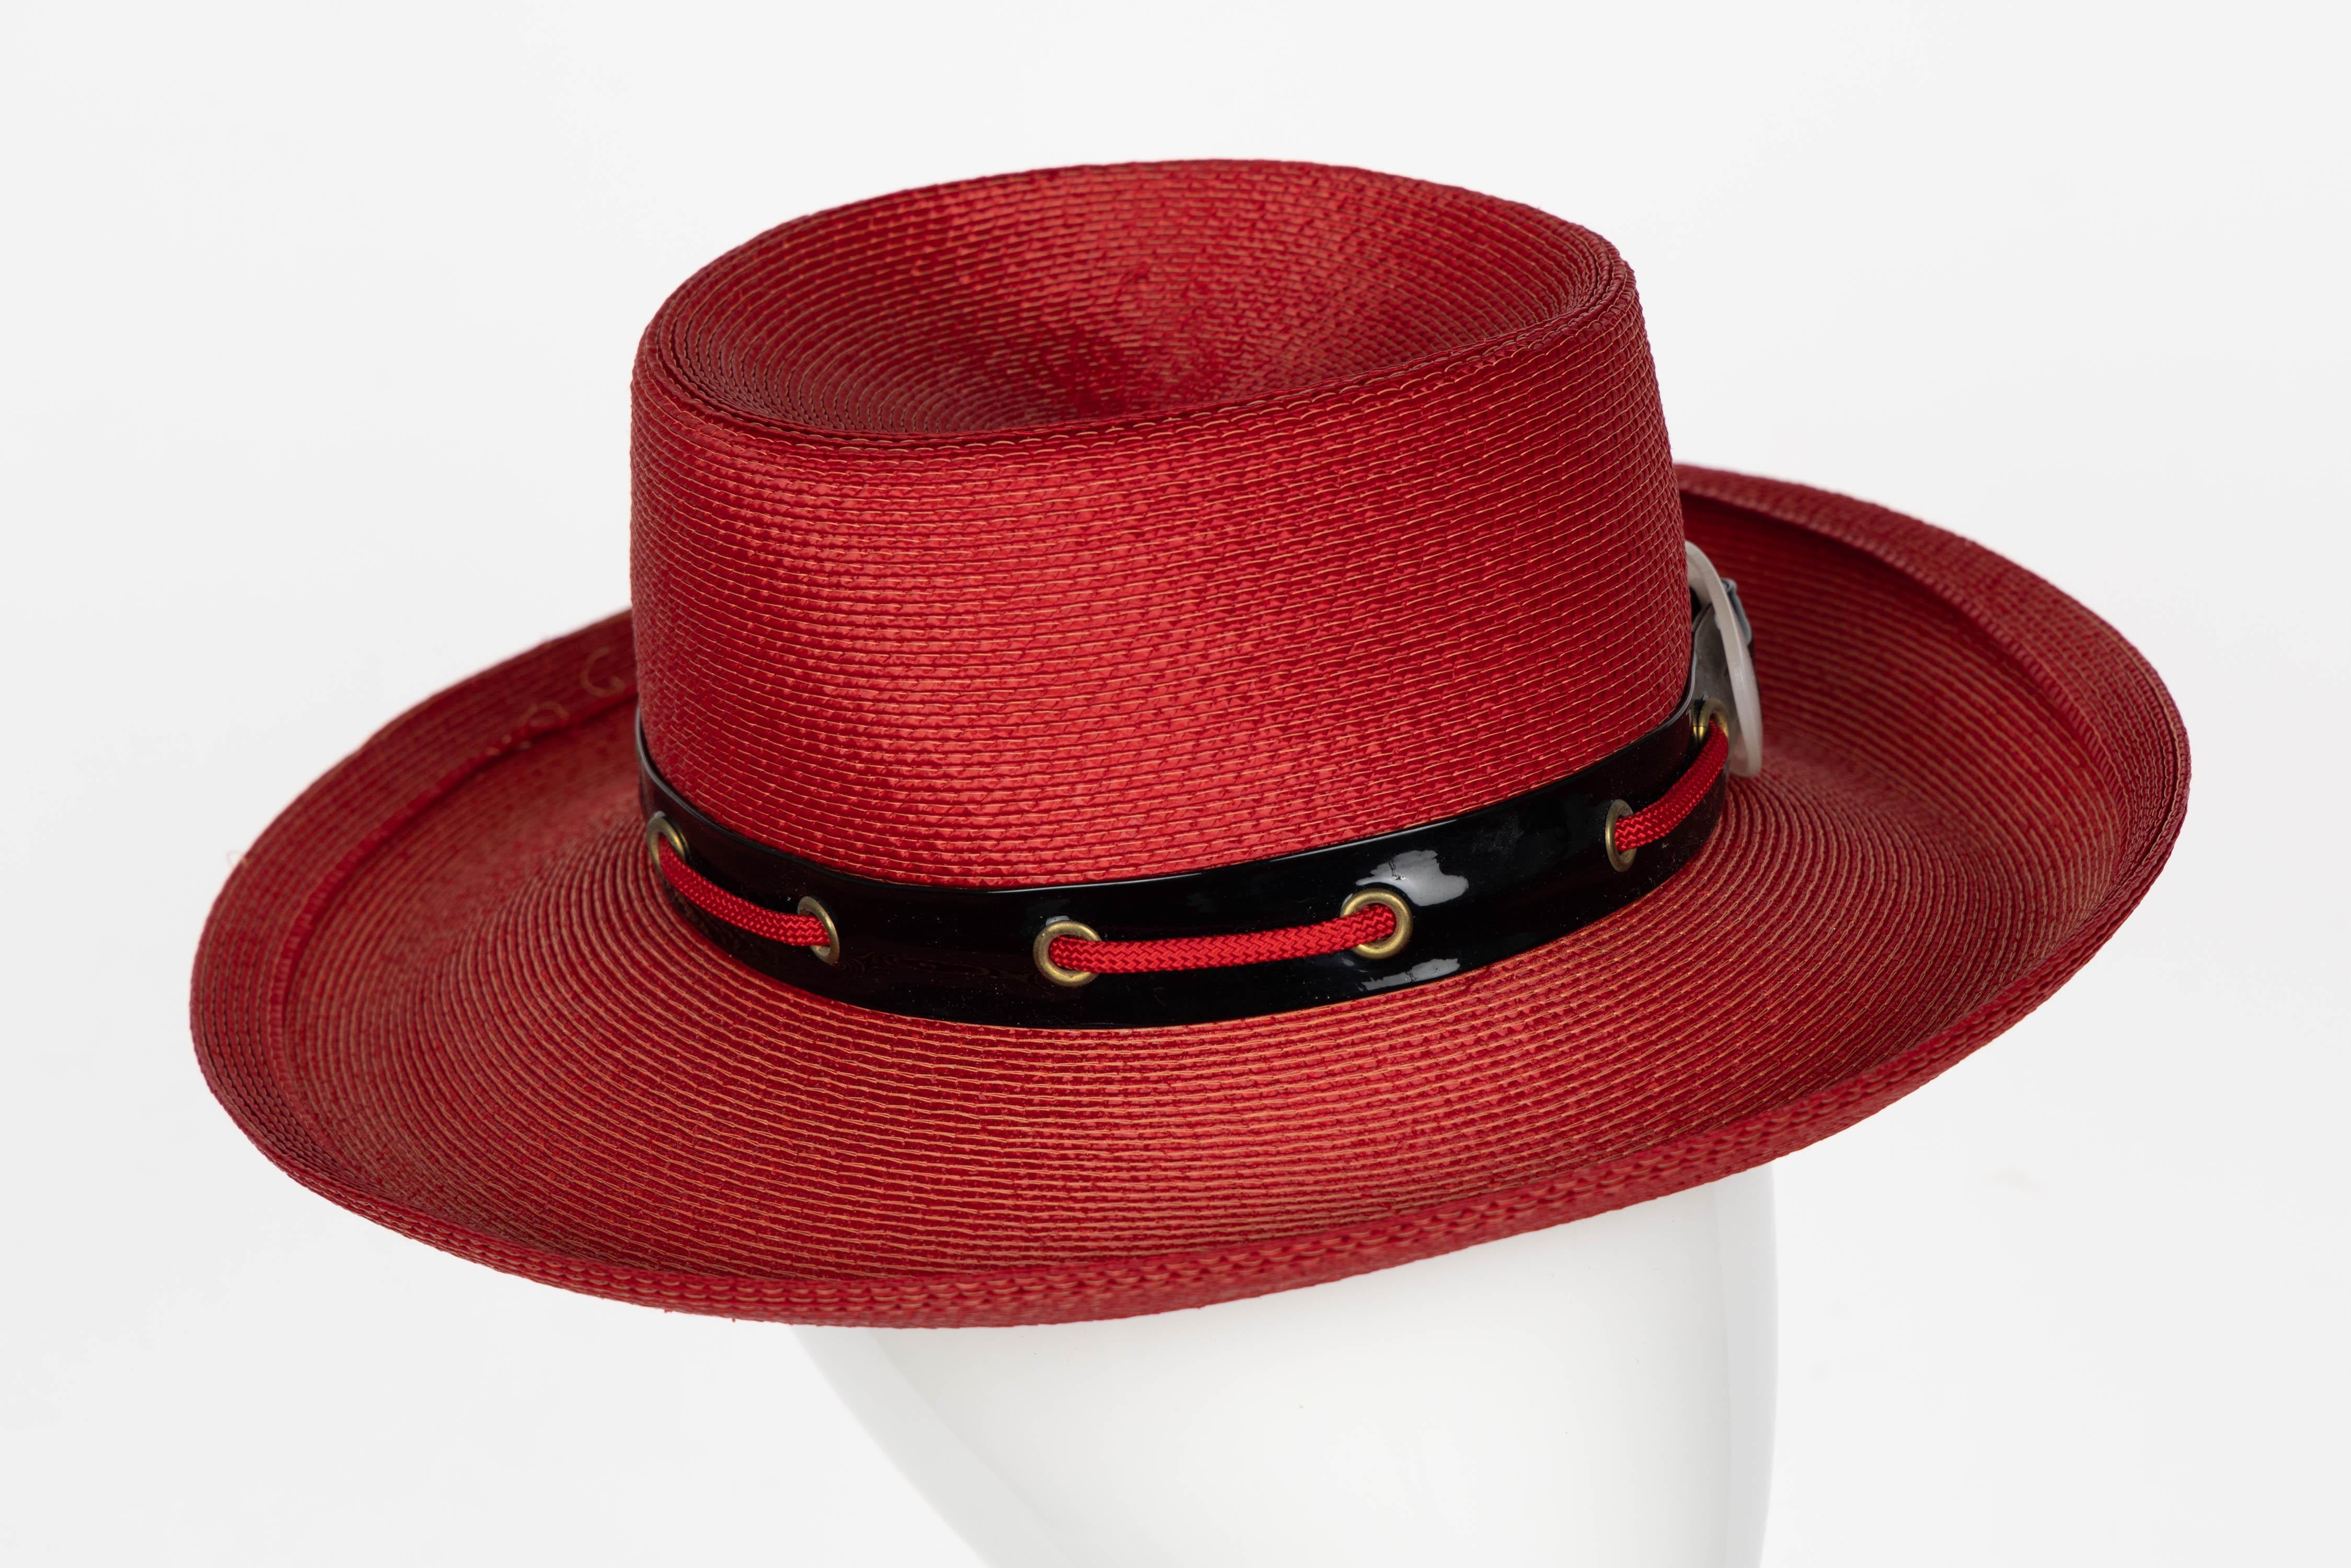 Yves Saint Laurent Red Straw Back Patent Lucite trim Hat, 1970s In Excellent Condition For Sale In Boca Raton, FL